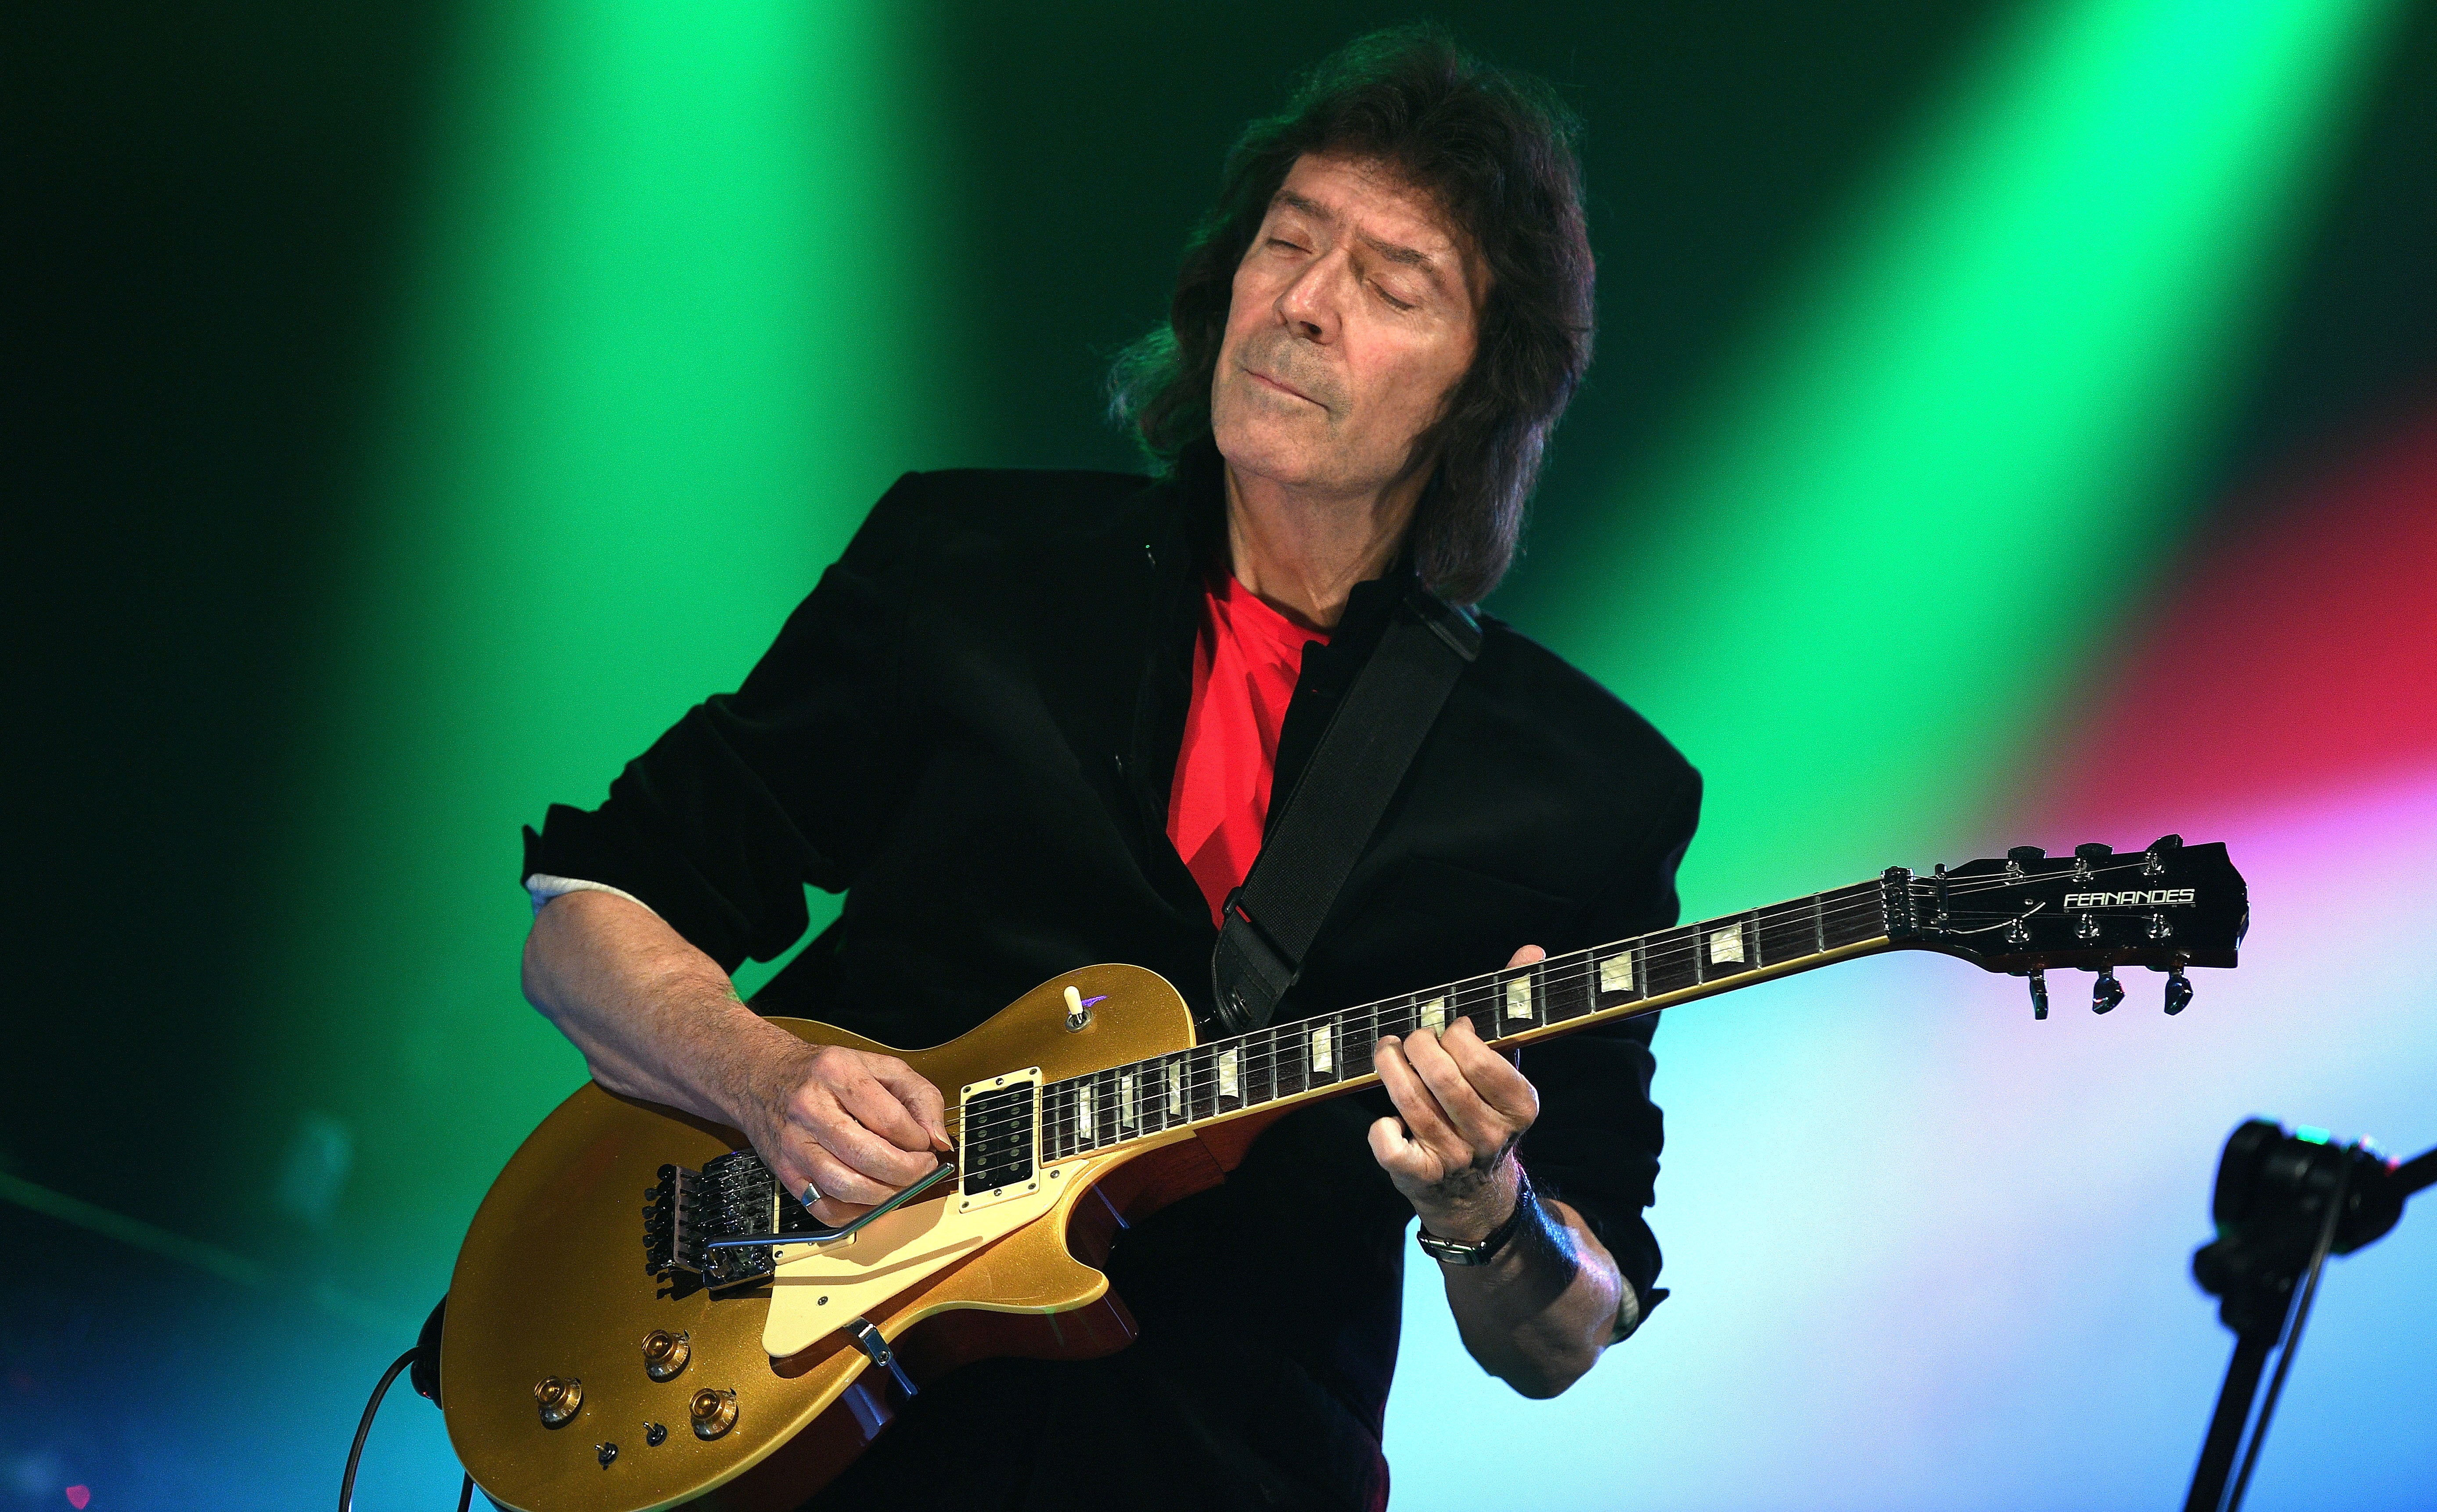 An Evening With Steve Hackett free presale password for early tickets in San Francisco